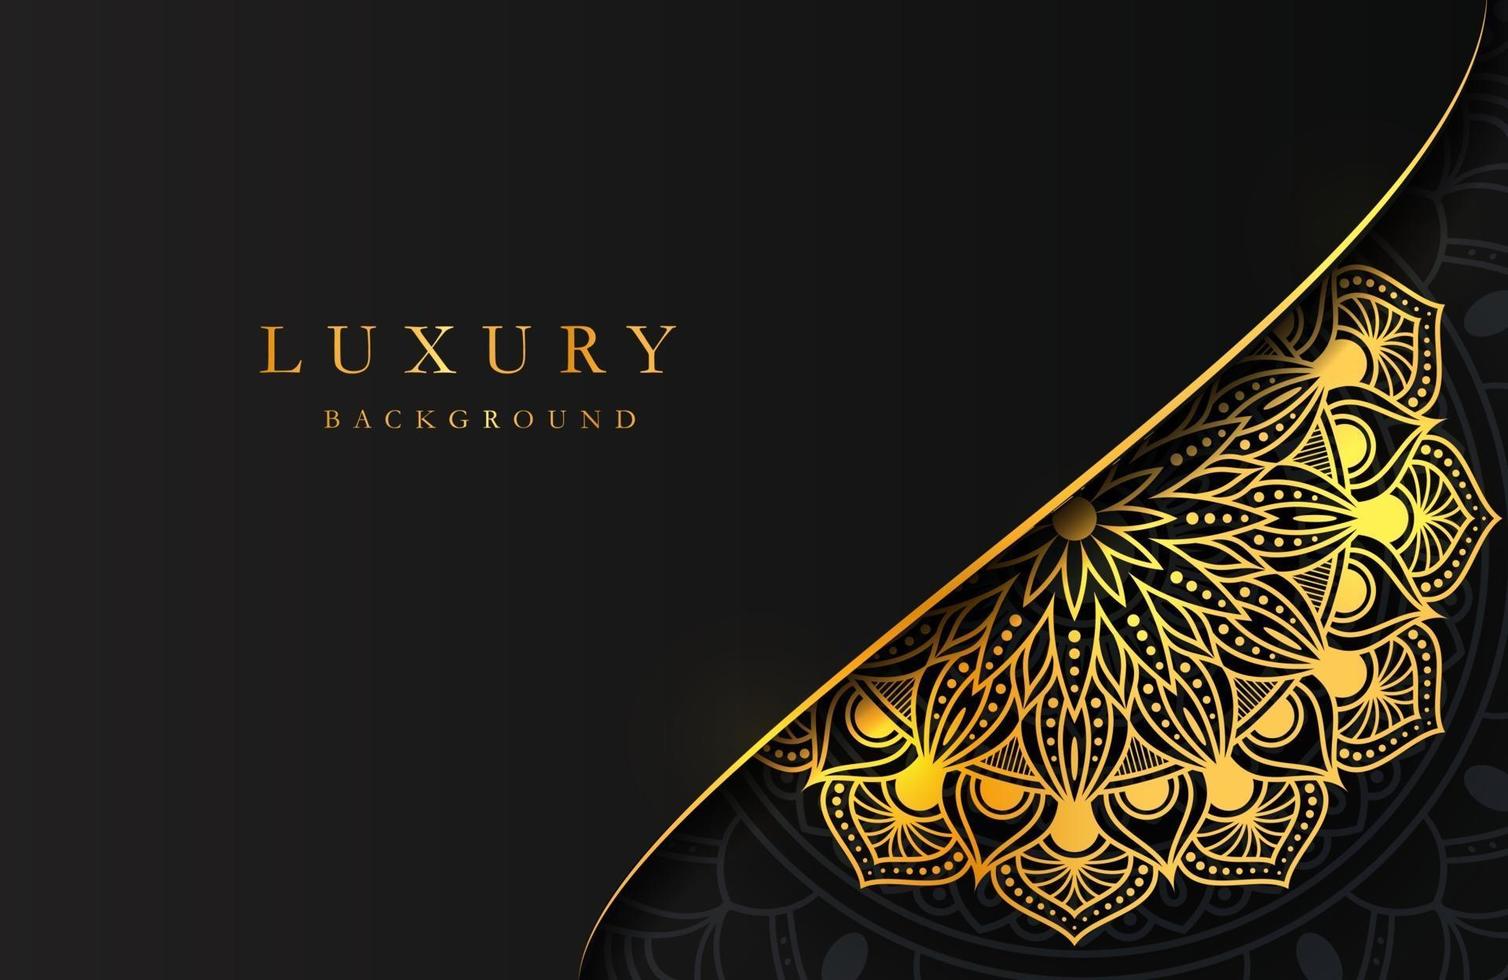 Luxury background with shimmering gold islamic arabesque ornament on dark surface vector